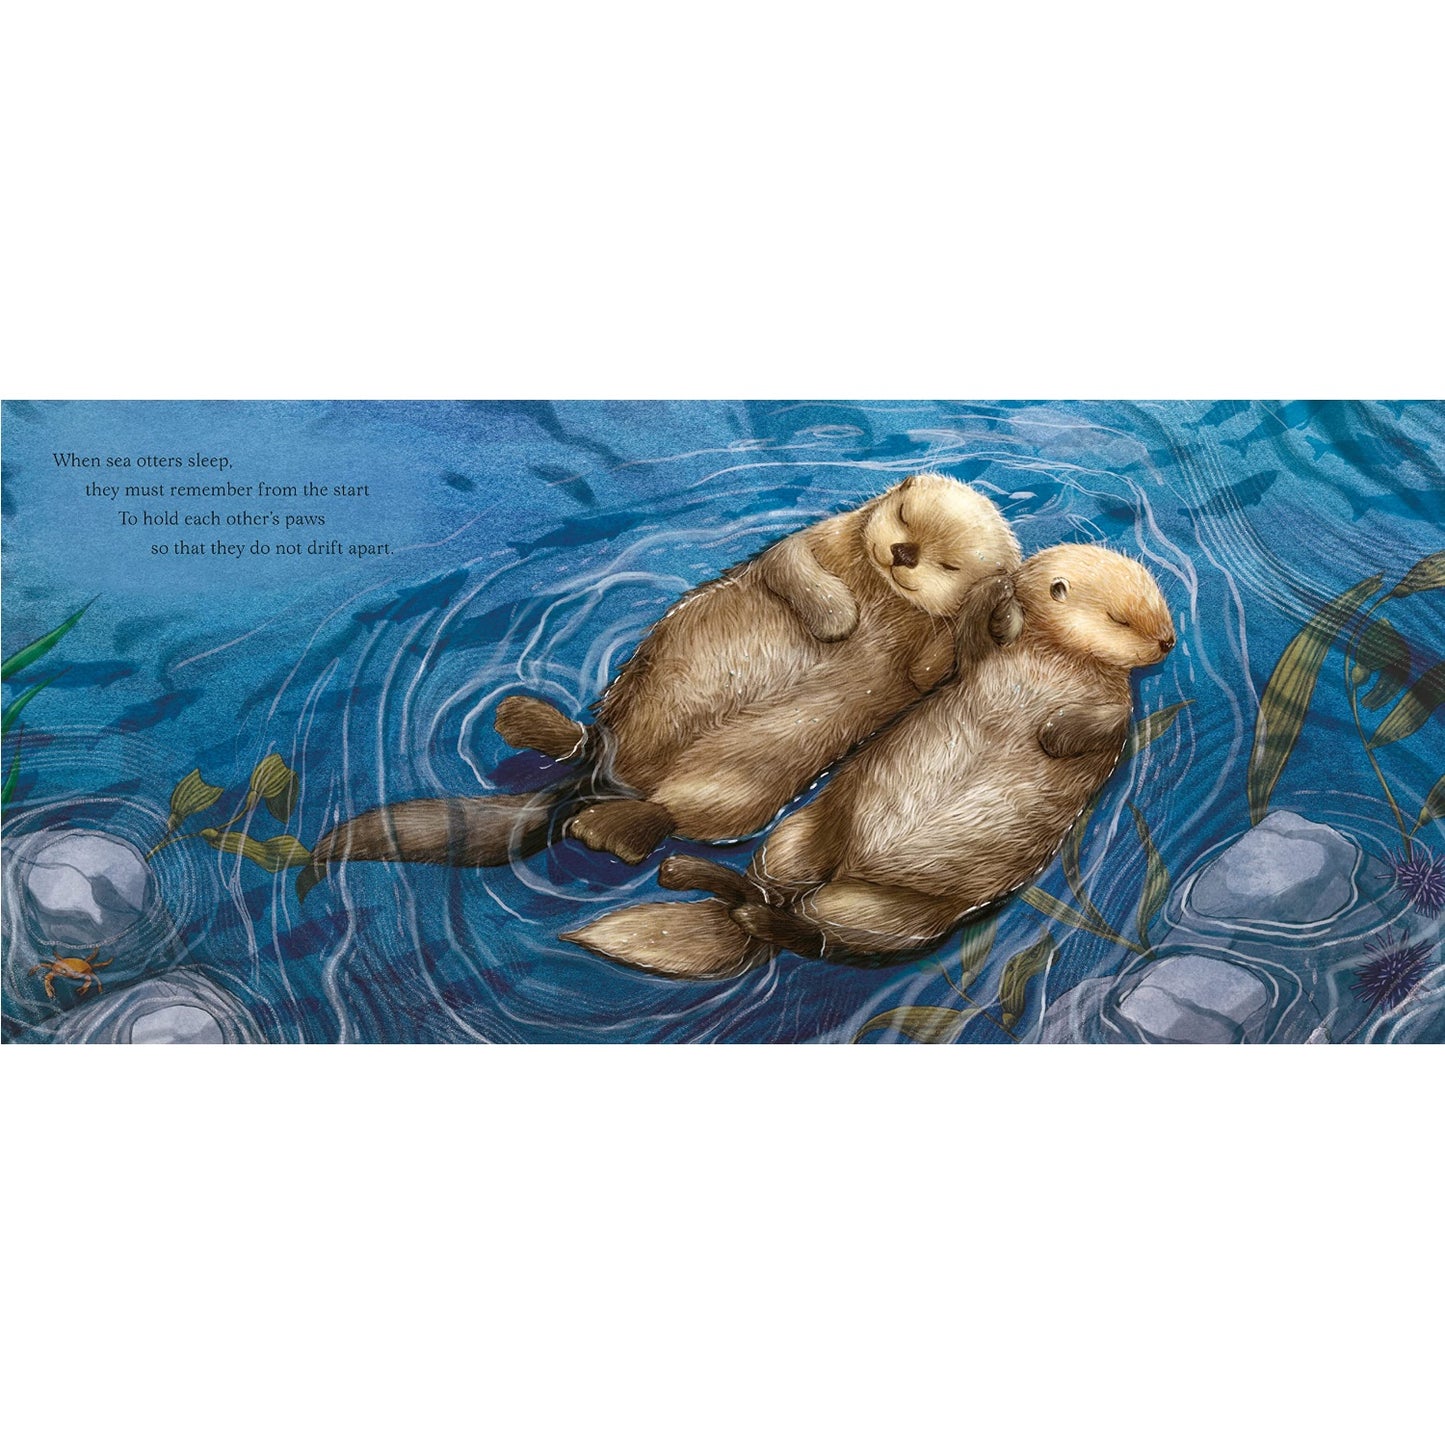 I am Oliver the Otter: A Tale from our Wild and Wonderful Riverbanks | Hardcover | Children’s Book on Nature